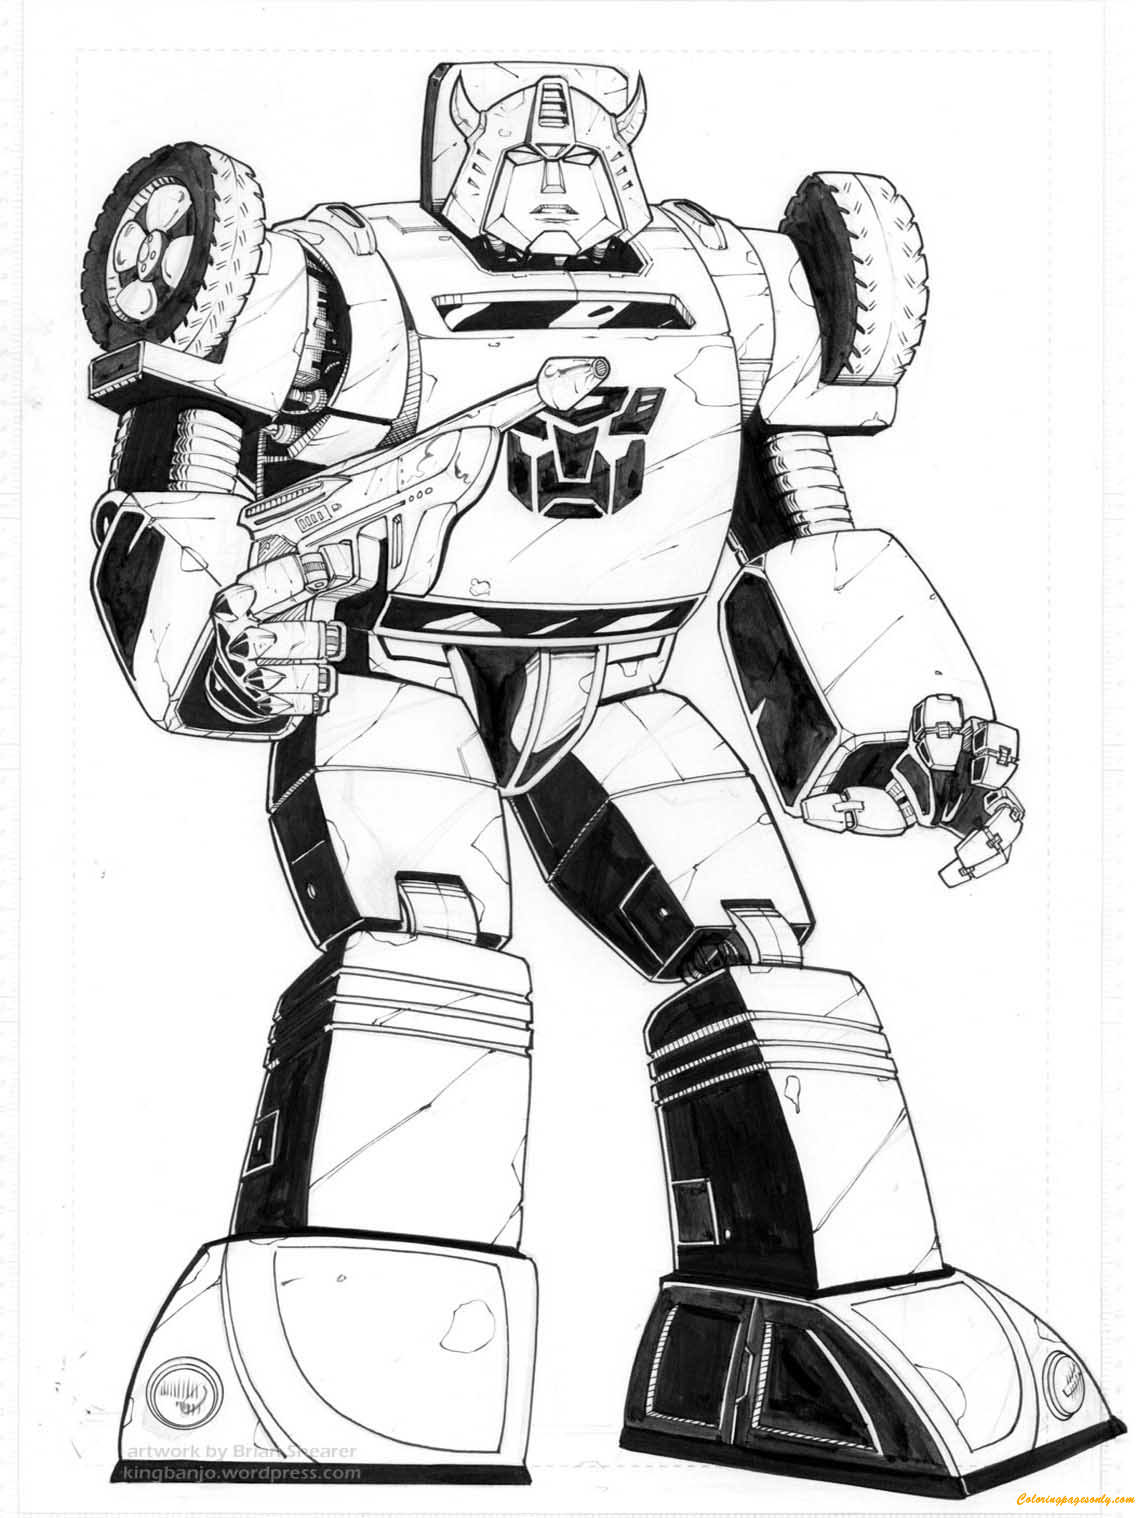 Bumblebee From Transformers Coloring Pages Bumblebee Coloring Pages Coloring Pages For Kids